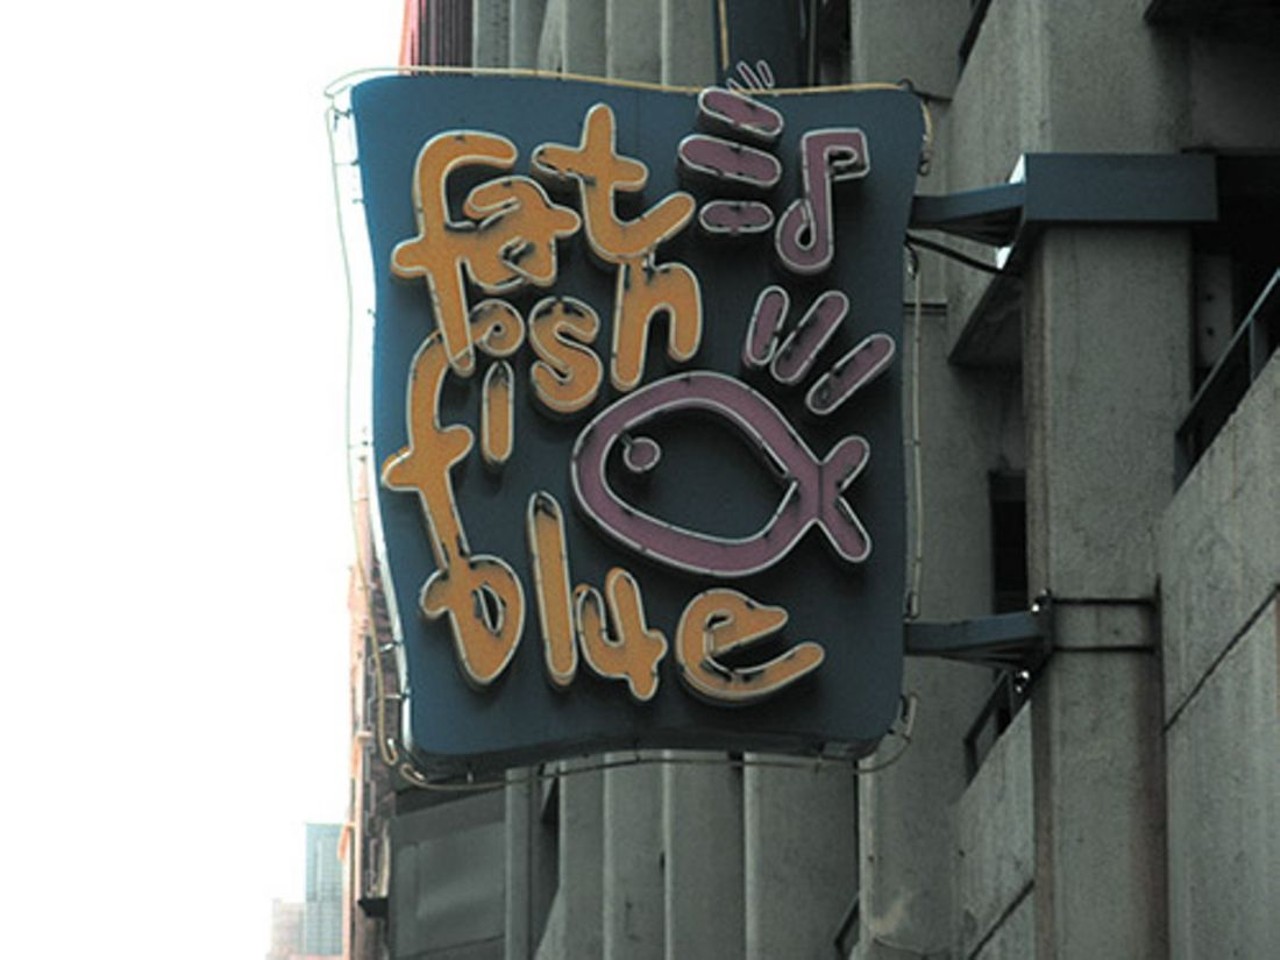  Fat Fish Blue
21 Prospect Ave., Cleveland
For more than 20 years, this sprawling downtown Cajun bar and restaurant was the best place in town to have gumbo and see some live blues and jazz. It unfortunately closed in 2011, making way for The Tilted Kilt.
Photo via Scene Archives